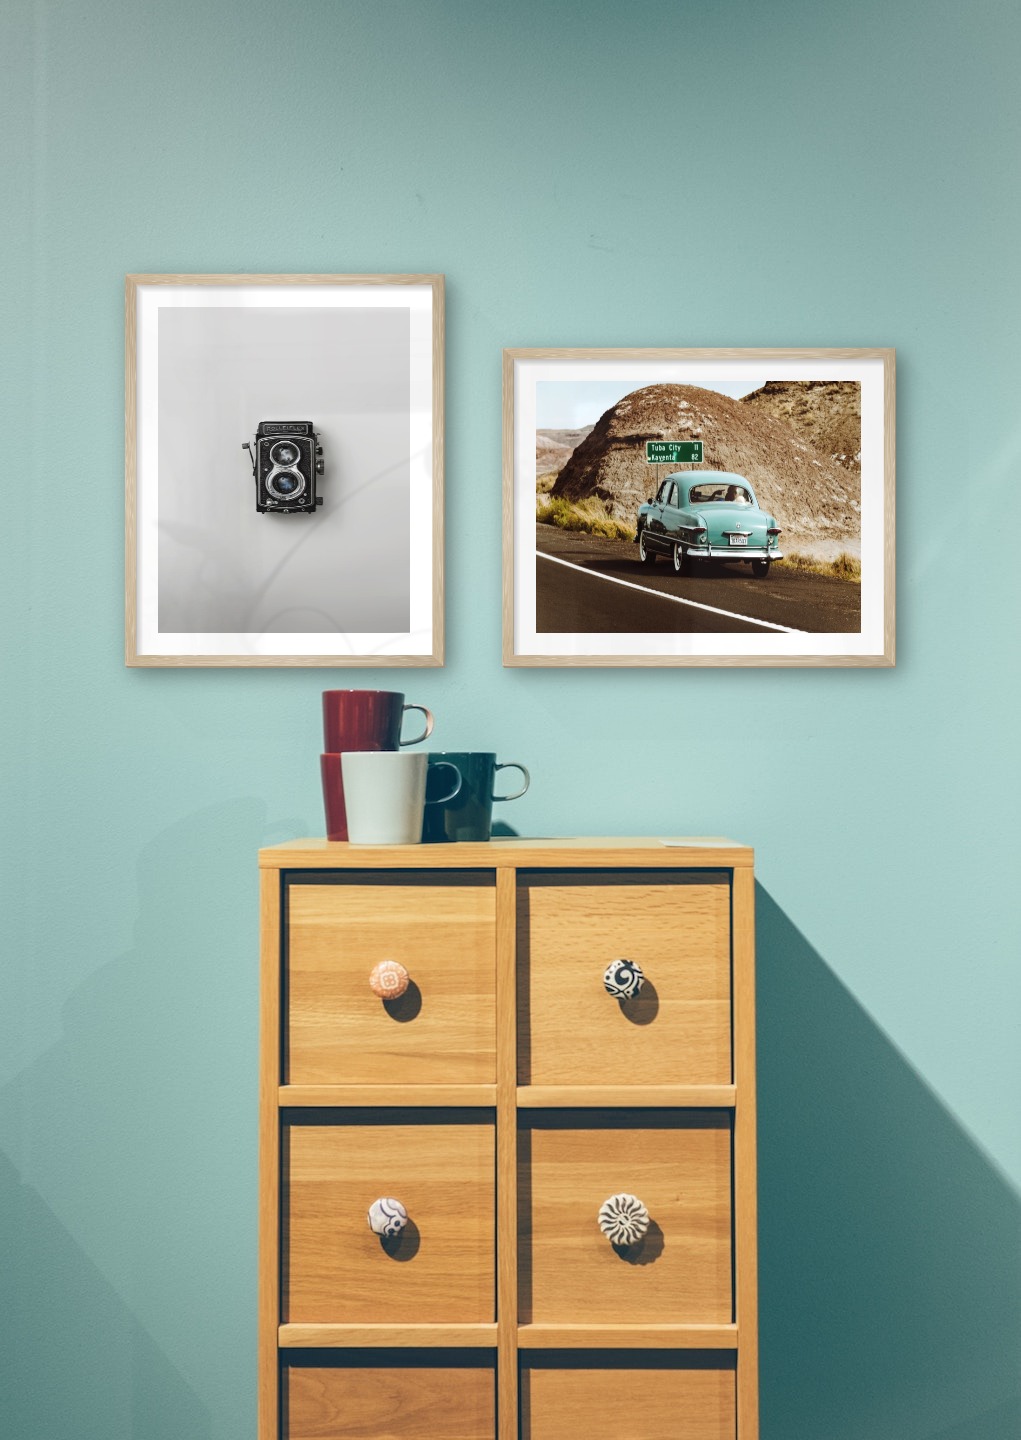 Gallery wall with picture frames in wood in sizes 40x50 with prints "Camera" and "Car on the road"